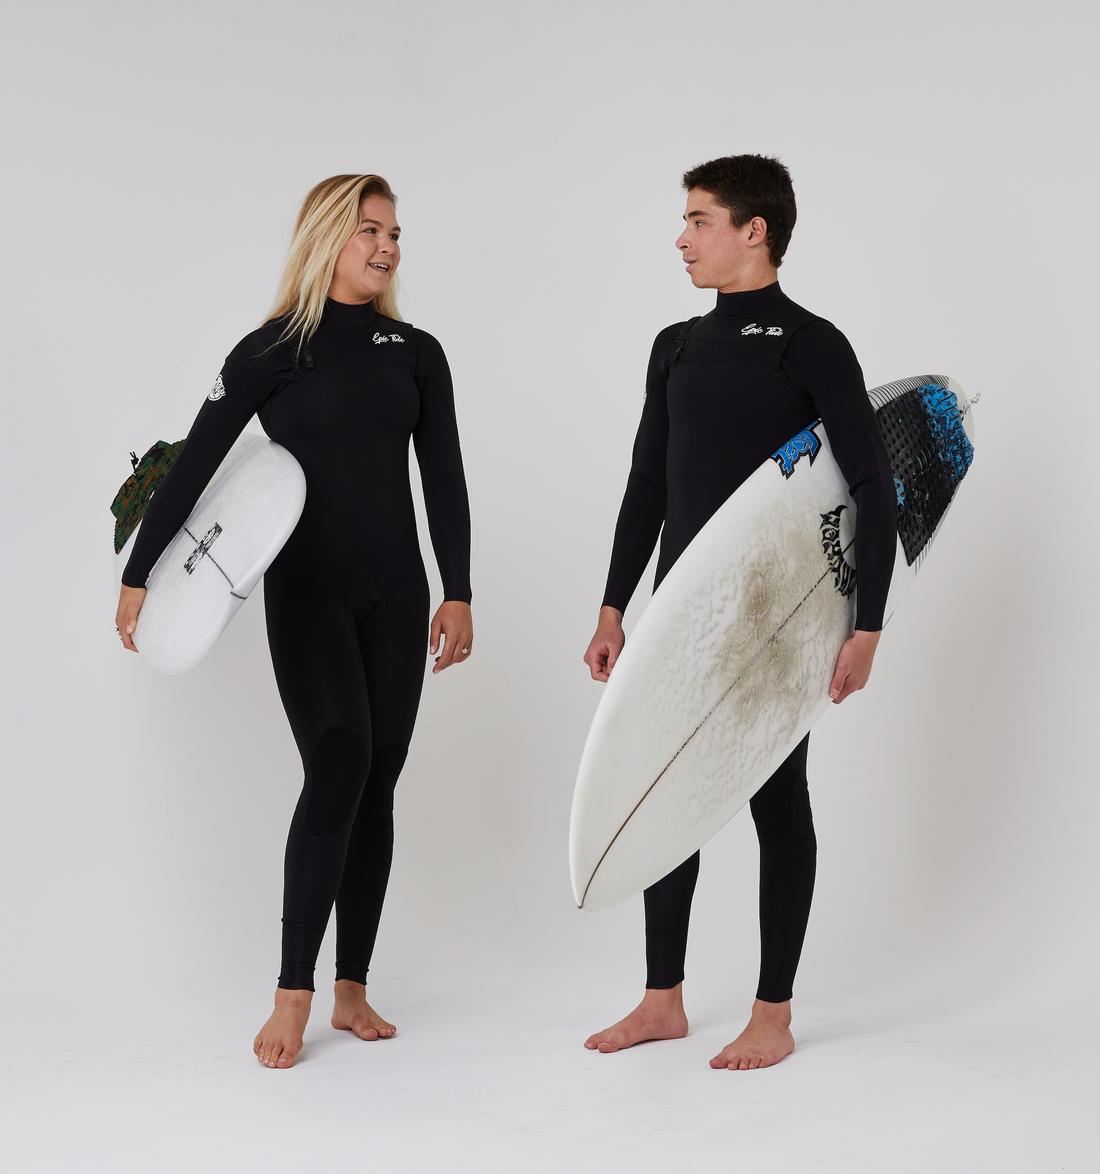 Most Wetsuit Companies Are Not Owned by Surfers